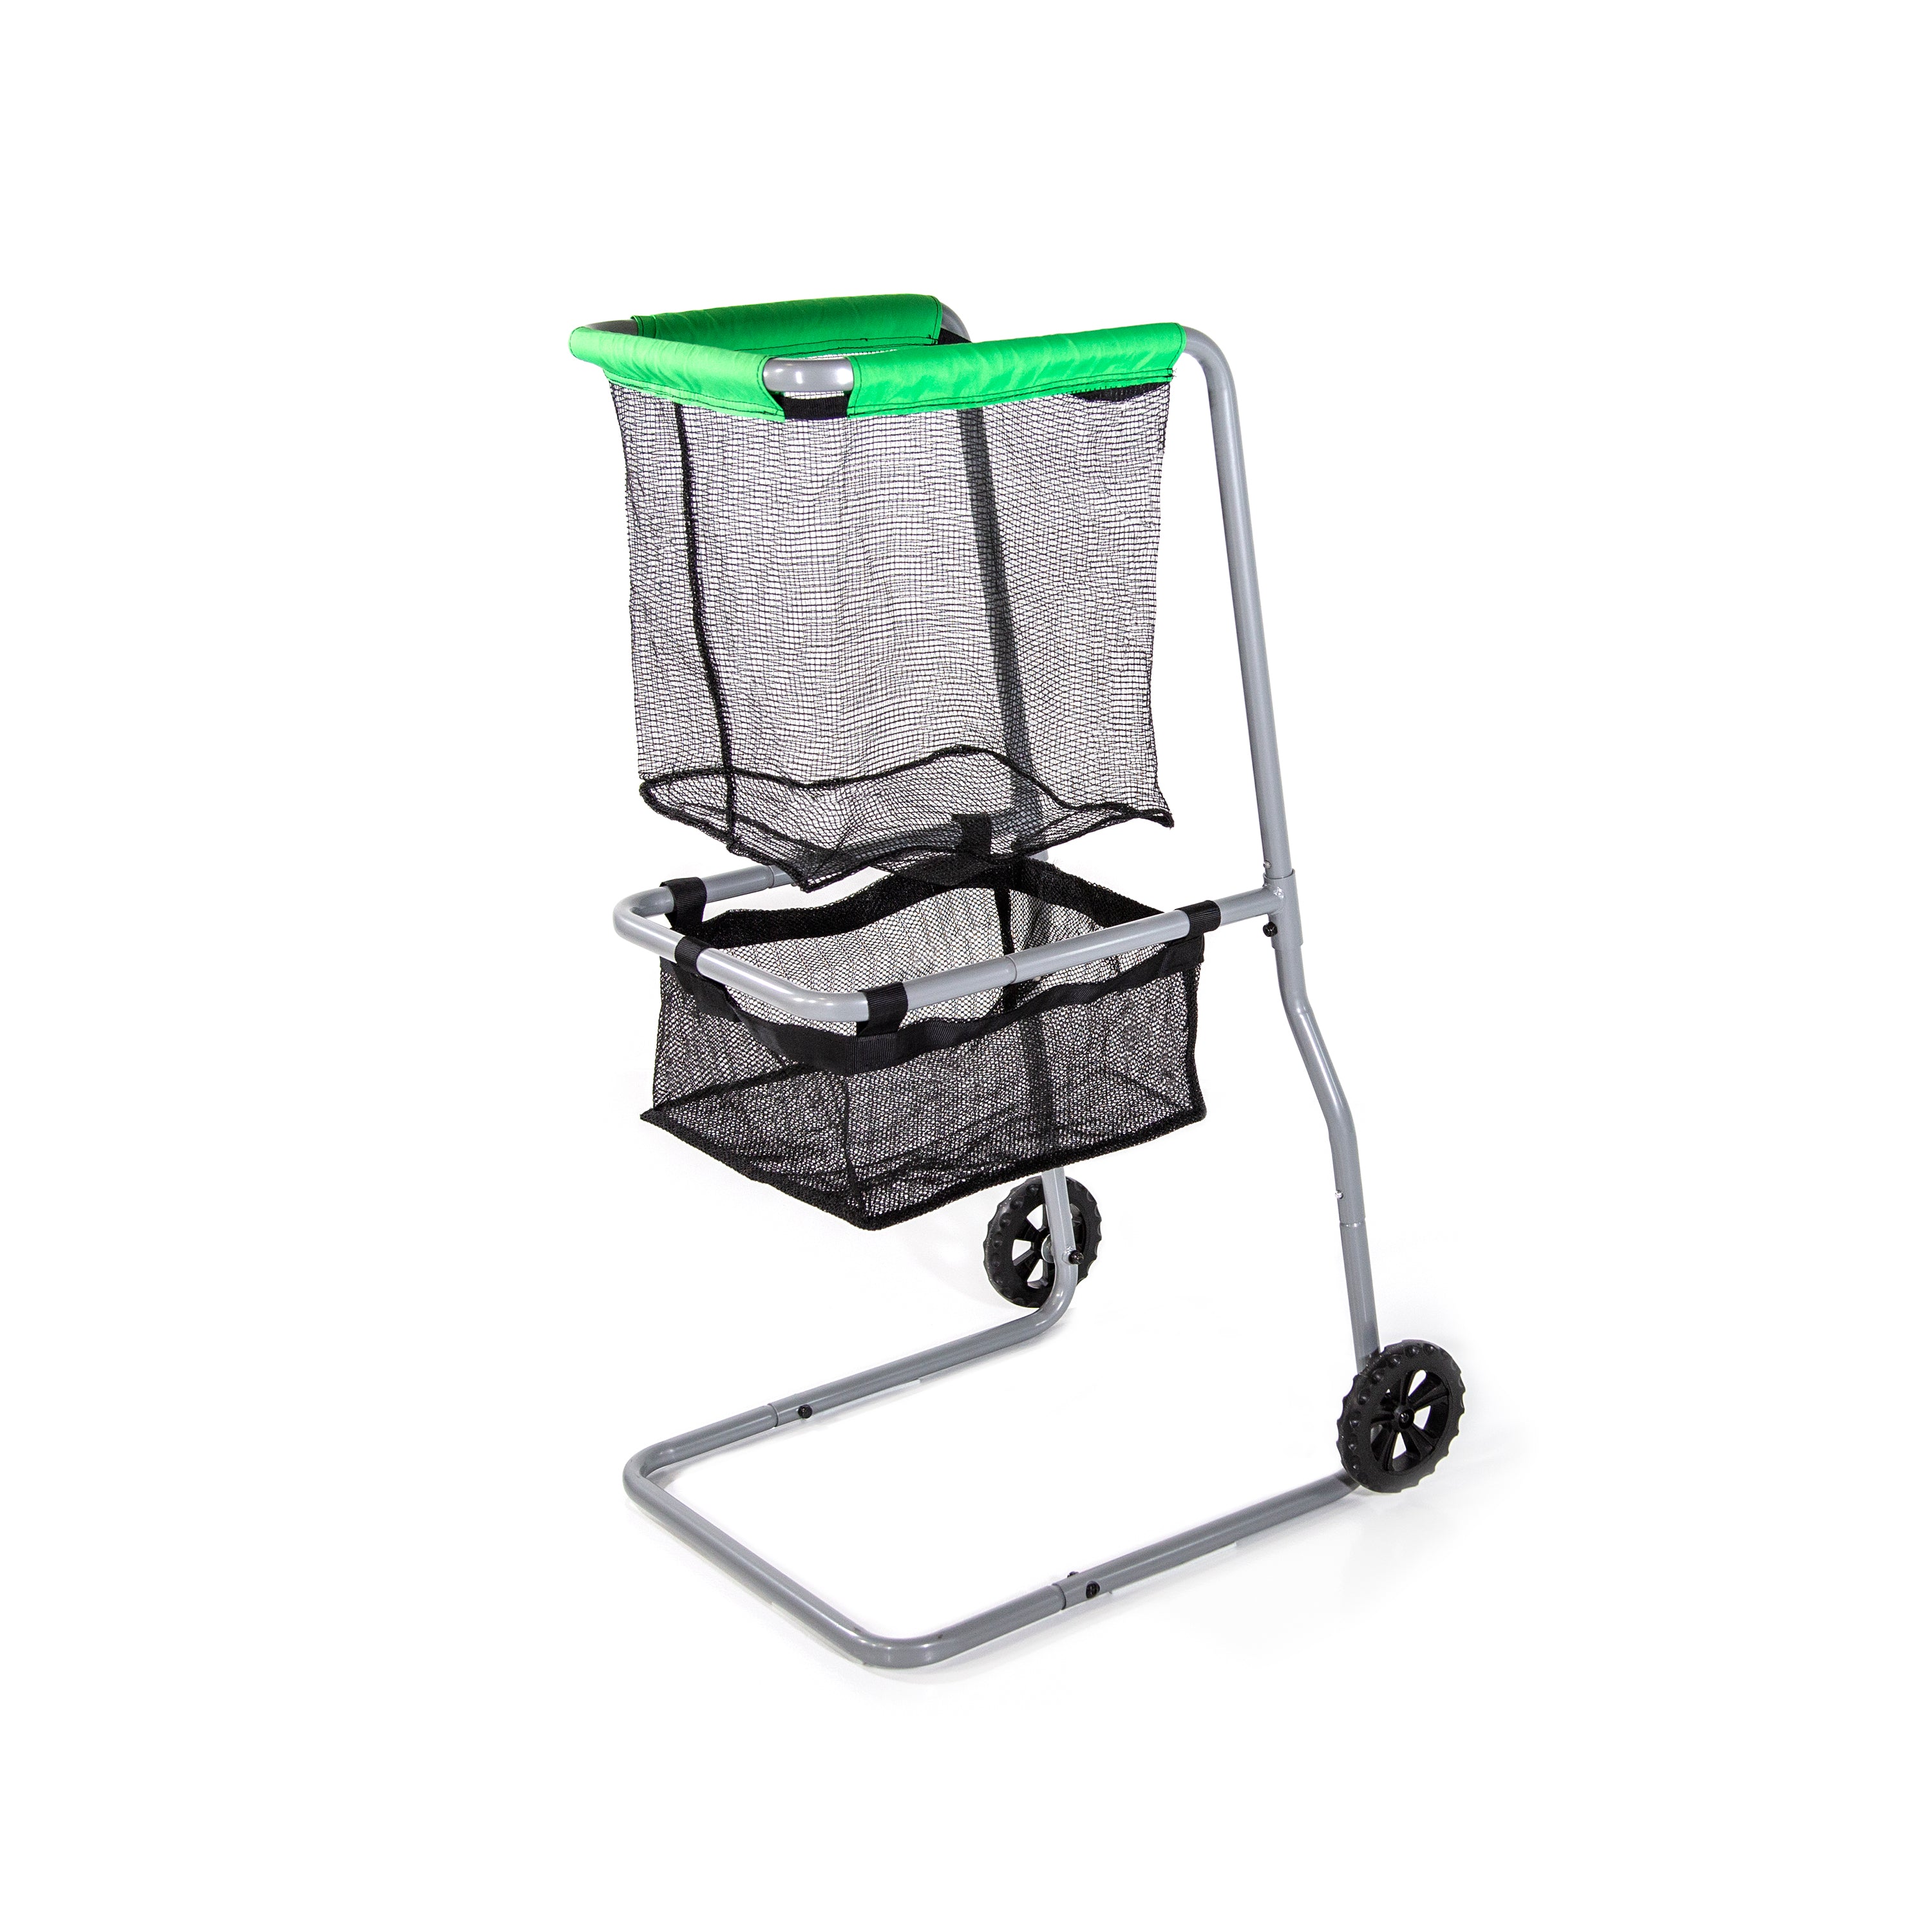 Multi-Sport ball cart with double-basket design, two wheels, and green and black netting. 